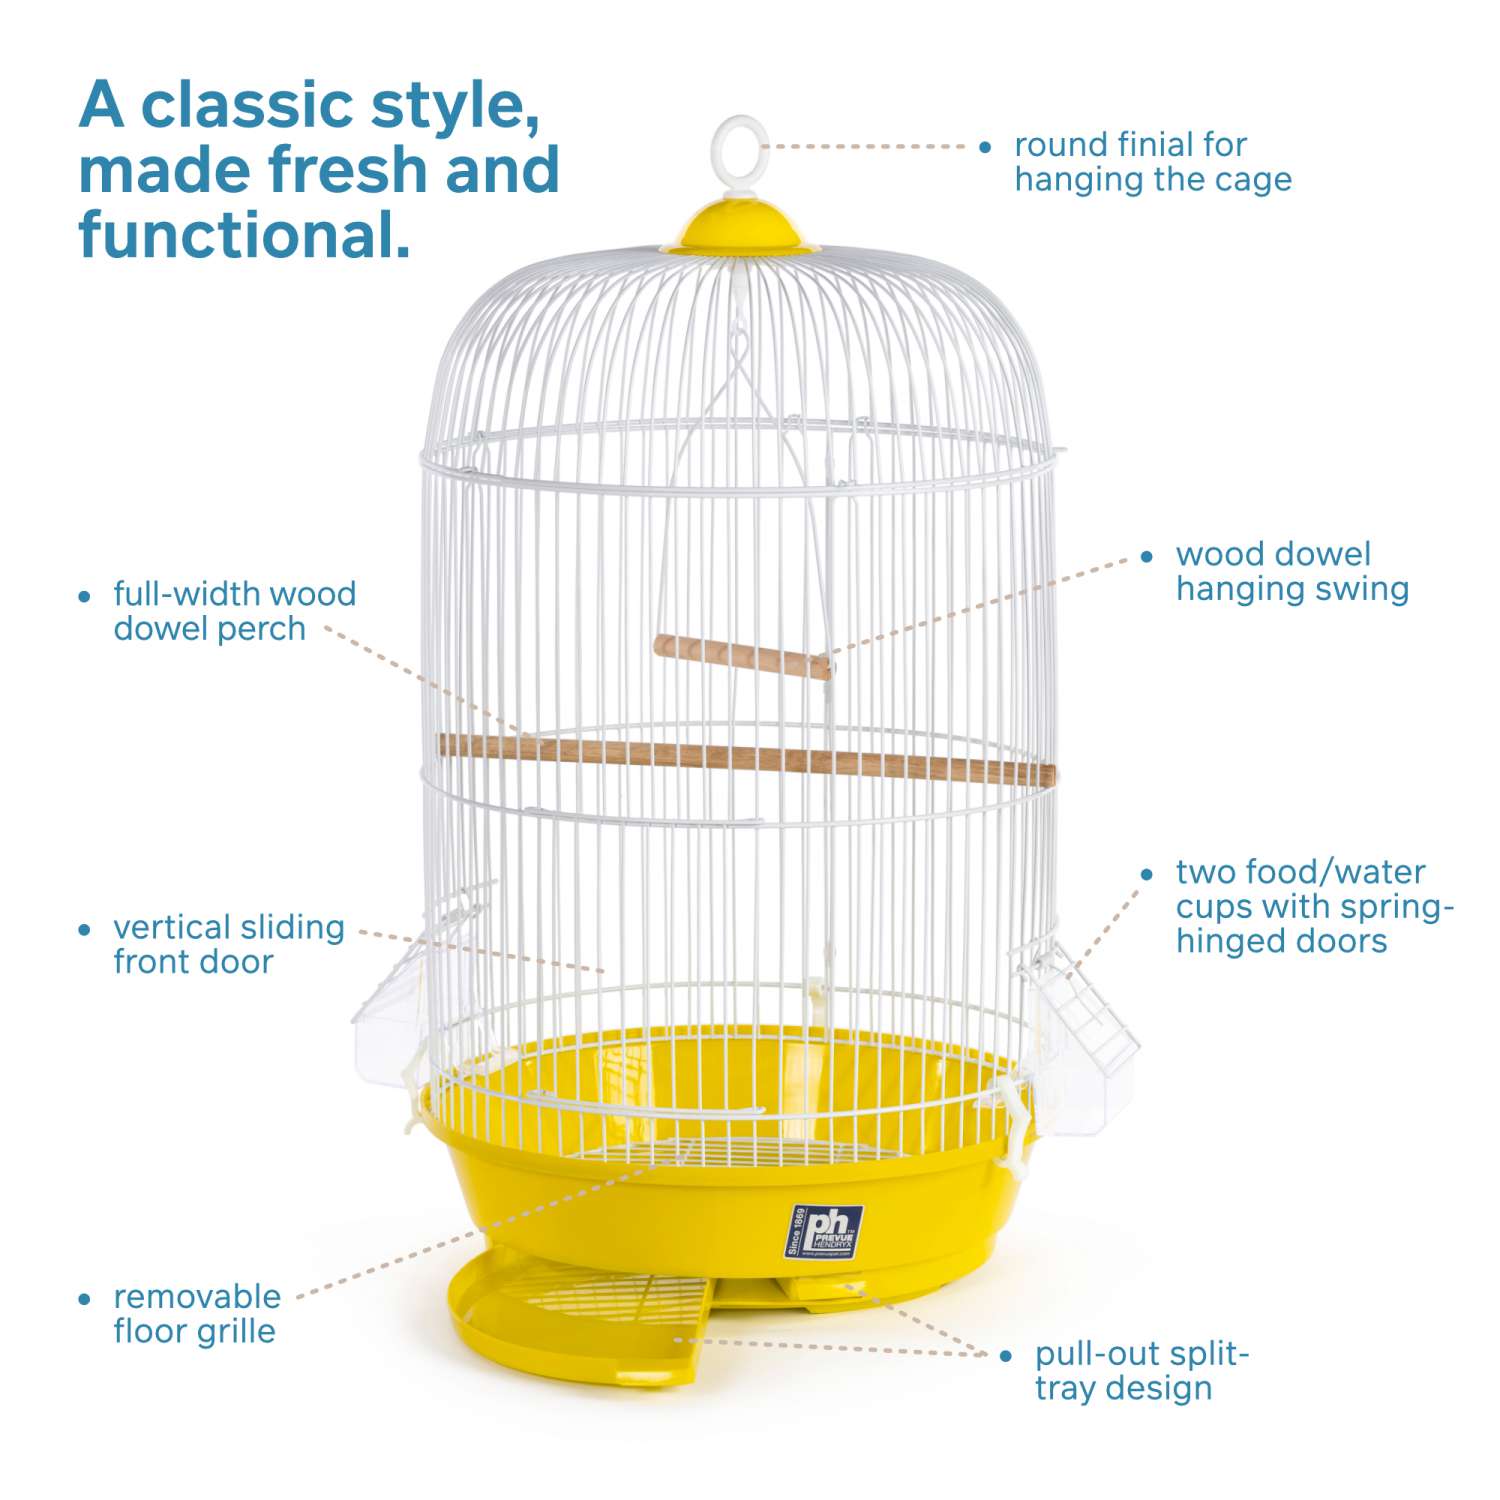 Large Hanging Half-round Bird Cage Cup 1182 Prevue Pet Products